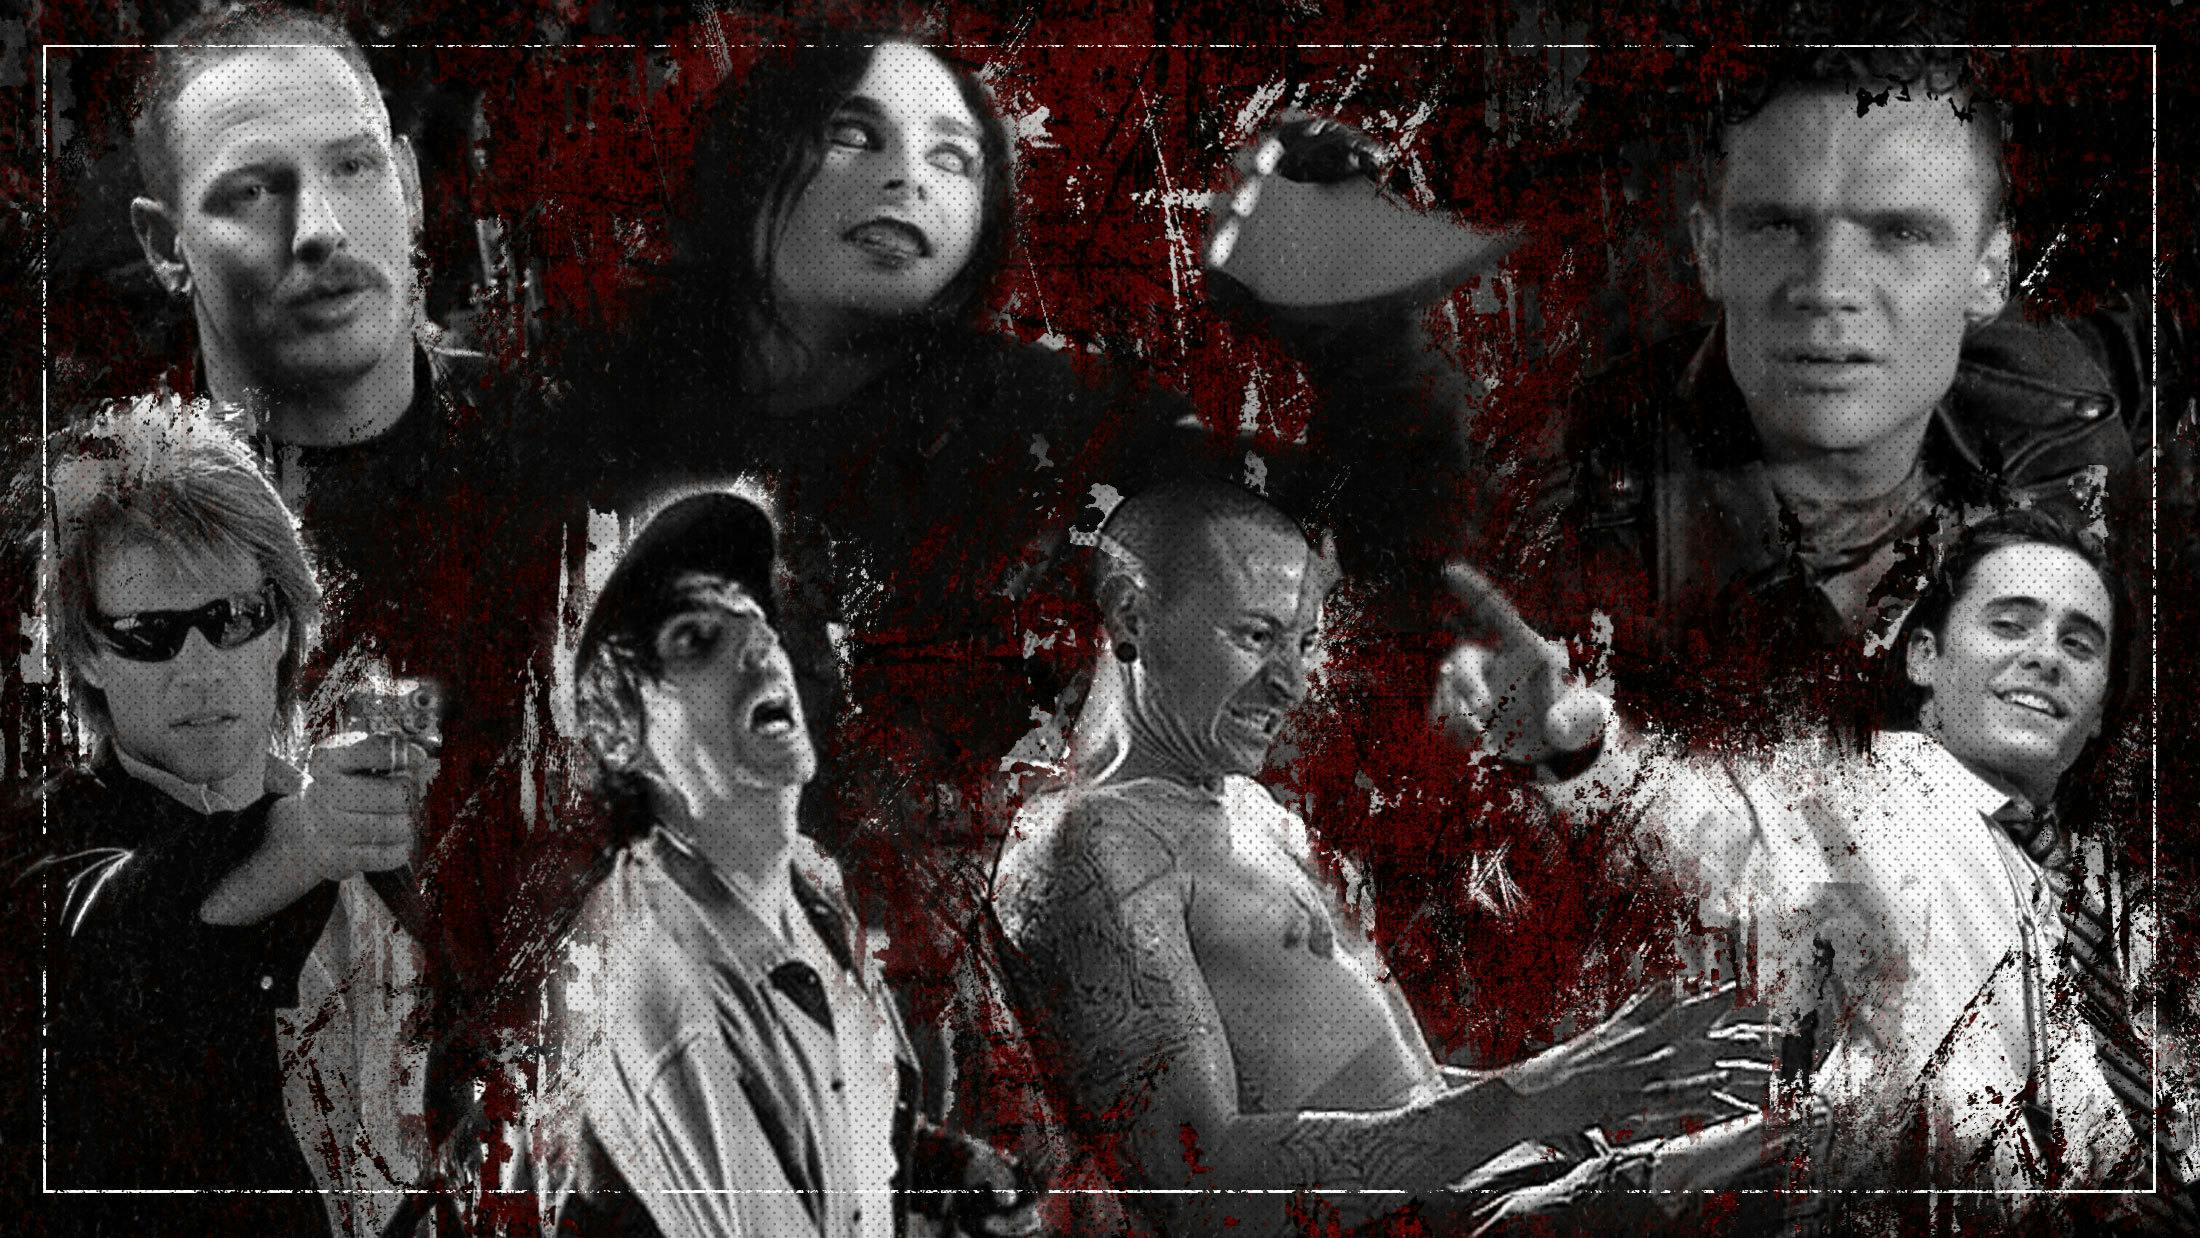 How well would you survive in a horror movie with these rock stars?